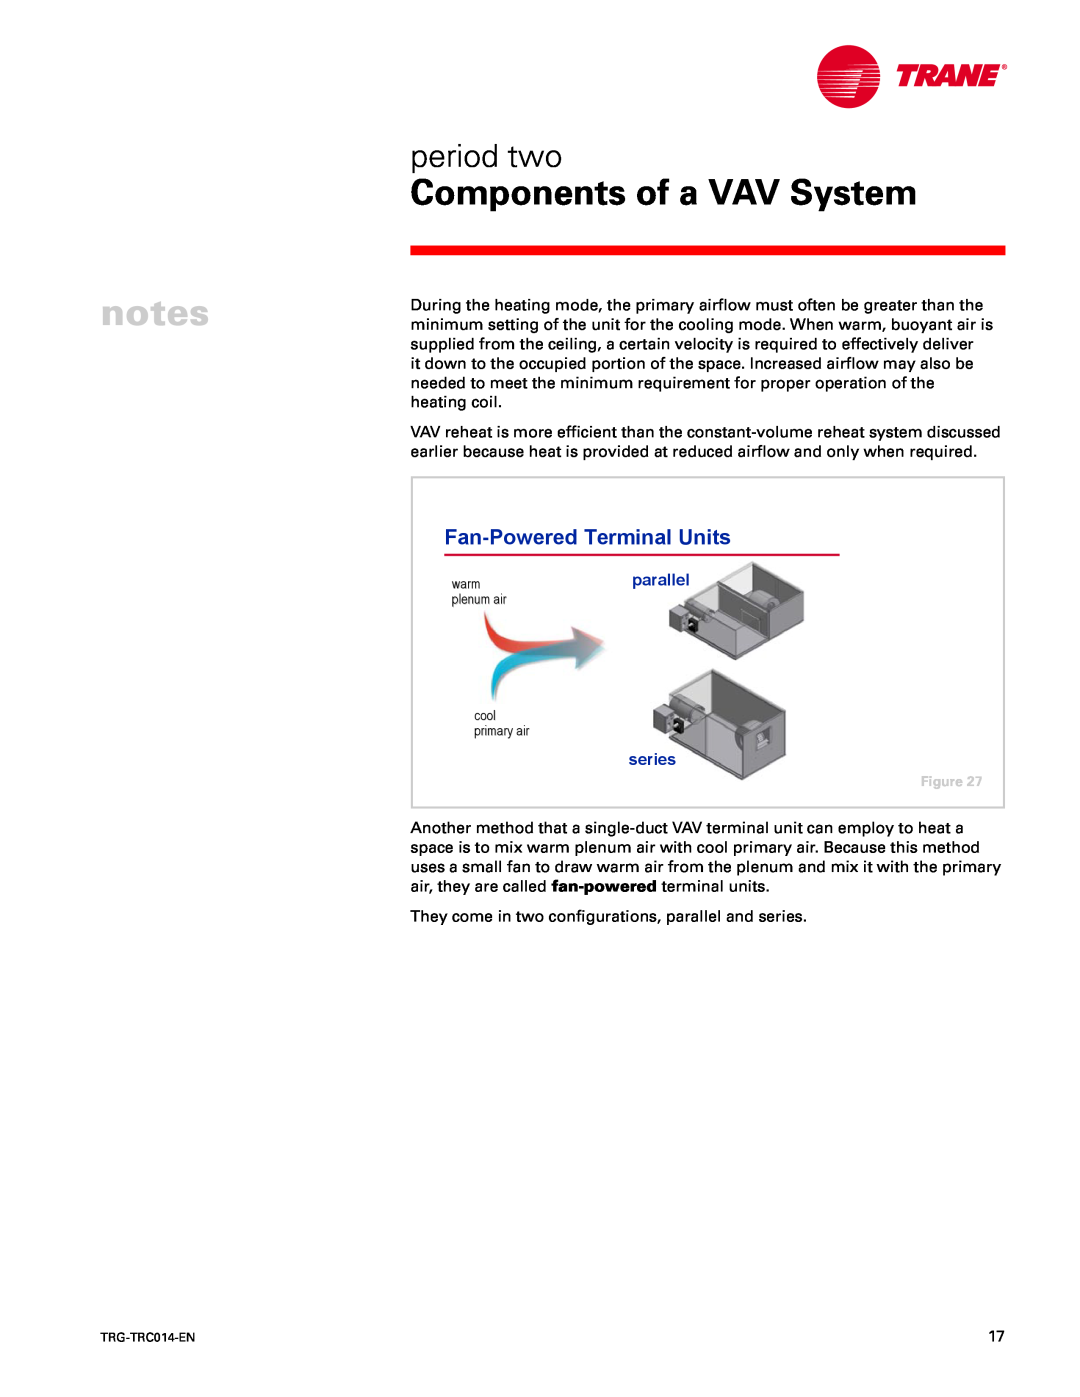 Trane TRG-TRC014-EN manual Fan-PoweredTerminal Units, Components of a VAV System, period two, parallel, series 